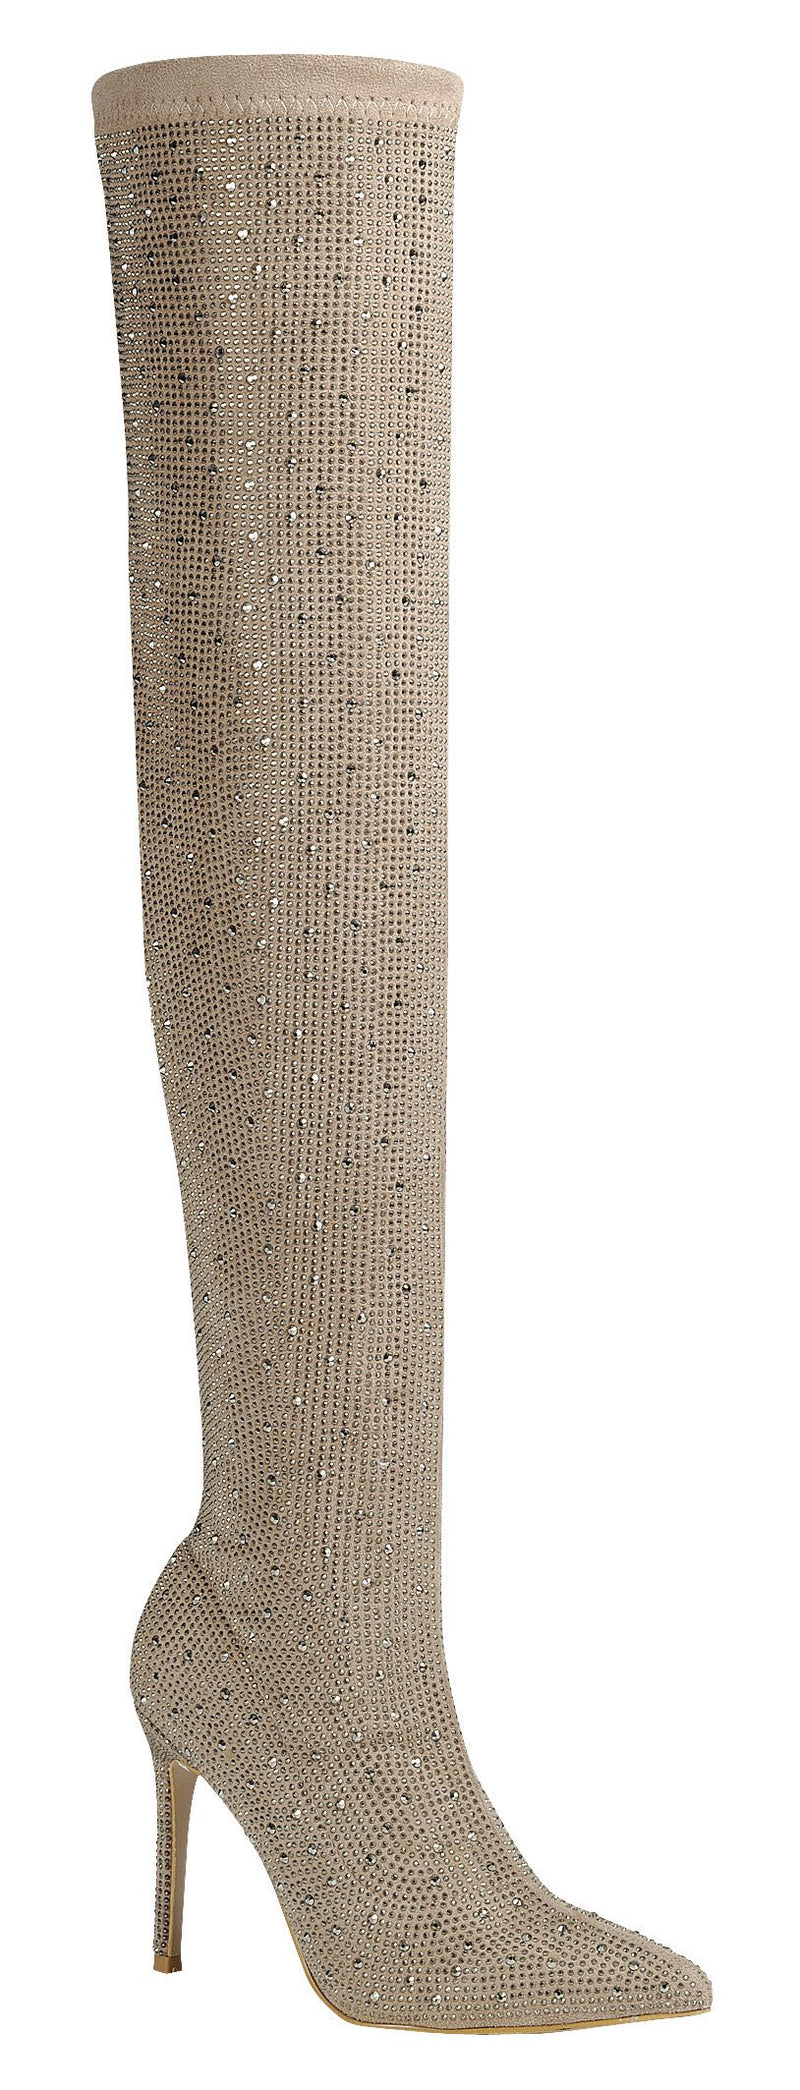 Taupe Rhinestone Over The Knee Boots Ensure-18 | Shoe Time